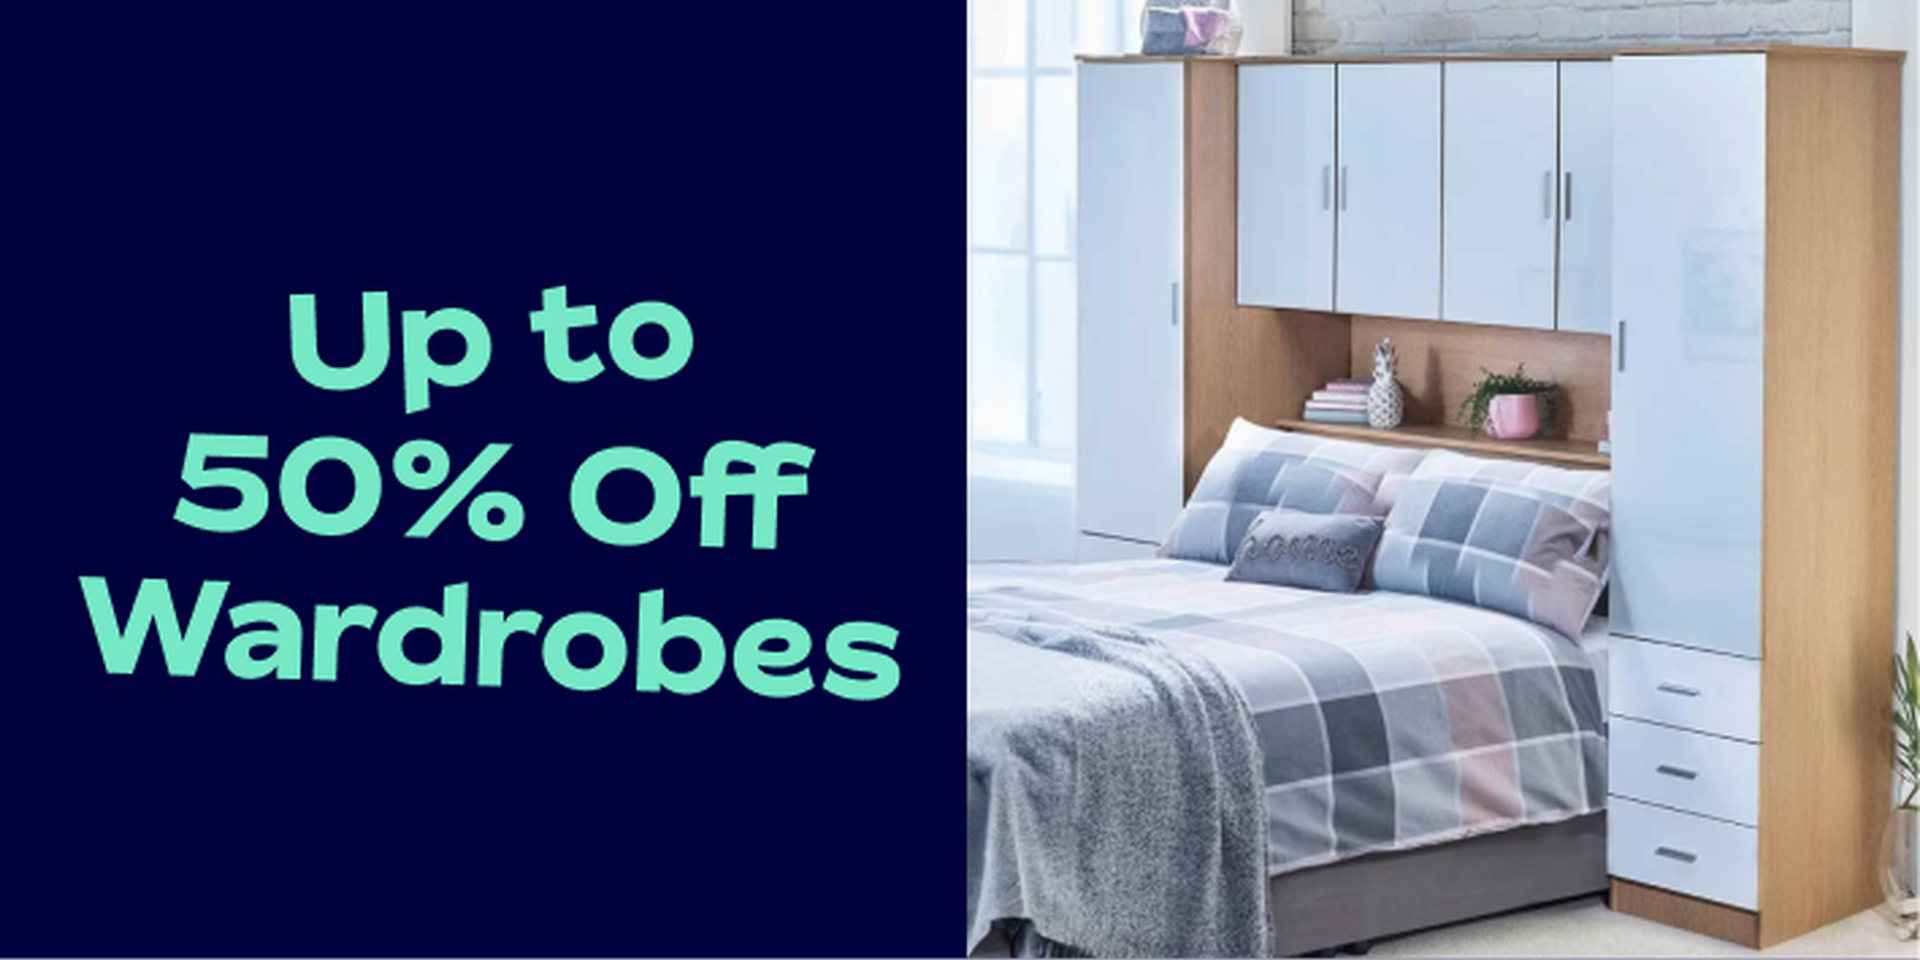 Up to 50% off Wardrobes